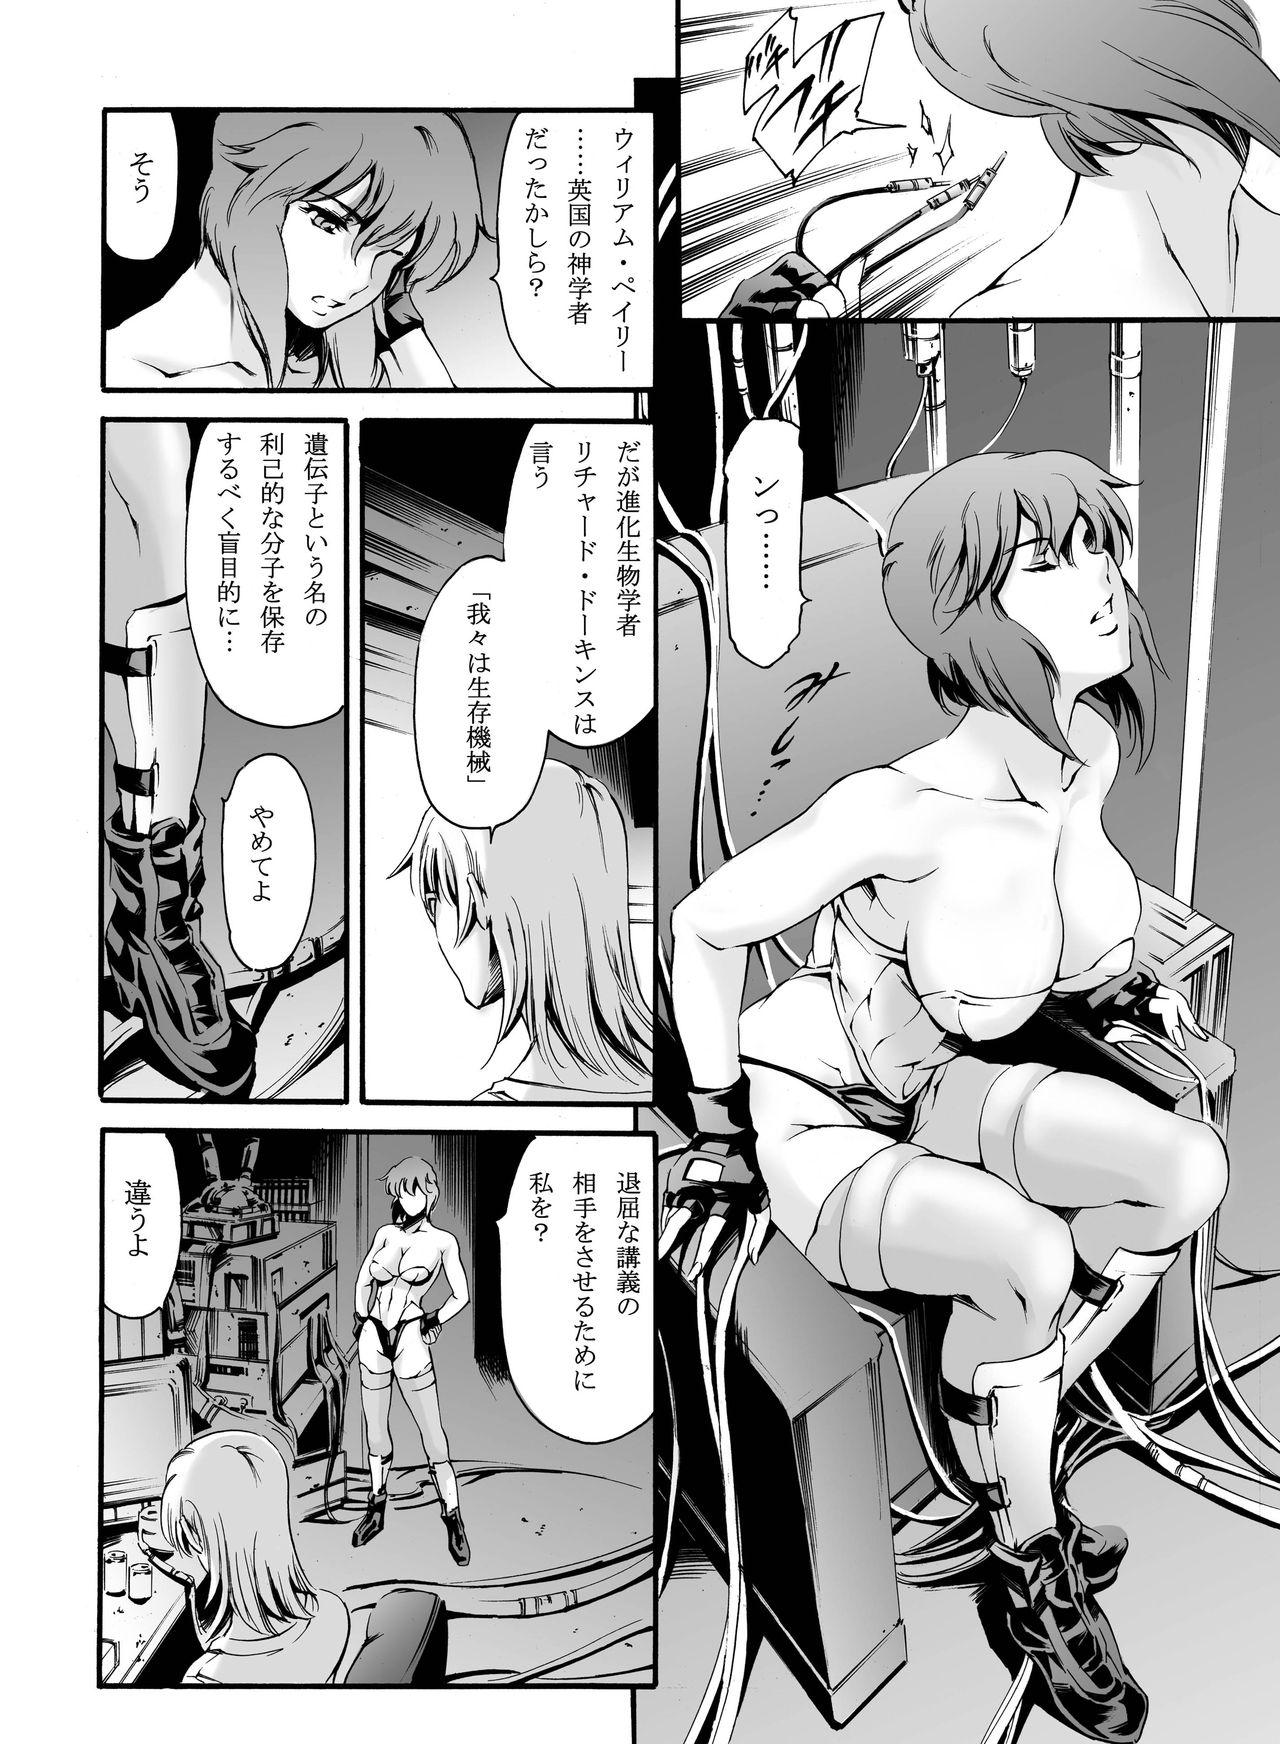 Spit Derenuki Vol. 1 - Ghost in the shell Ano - Page 5